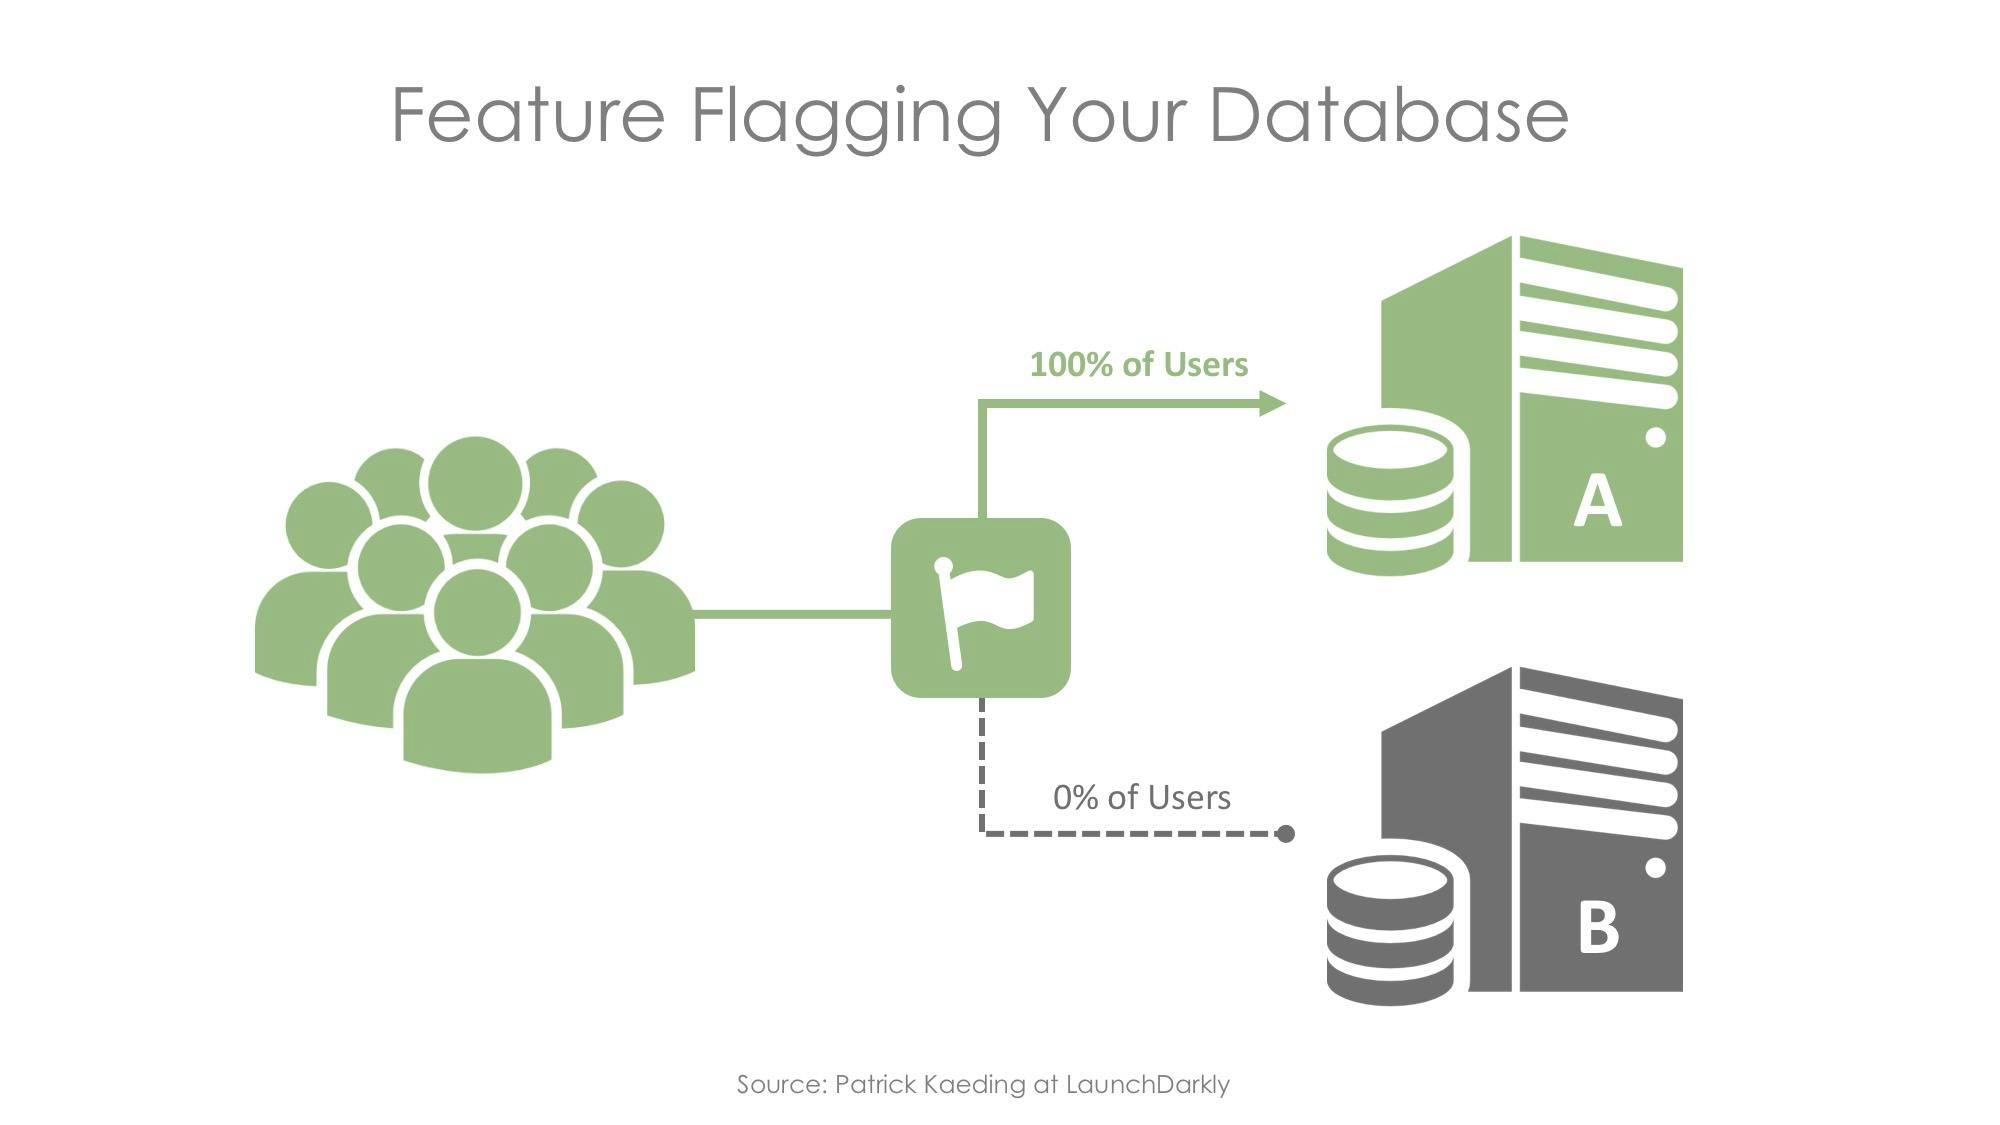 Feature flagging your database infographic